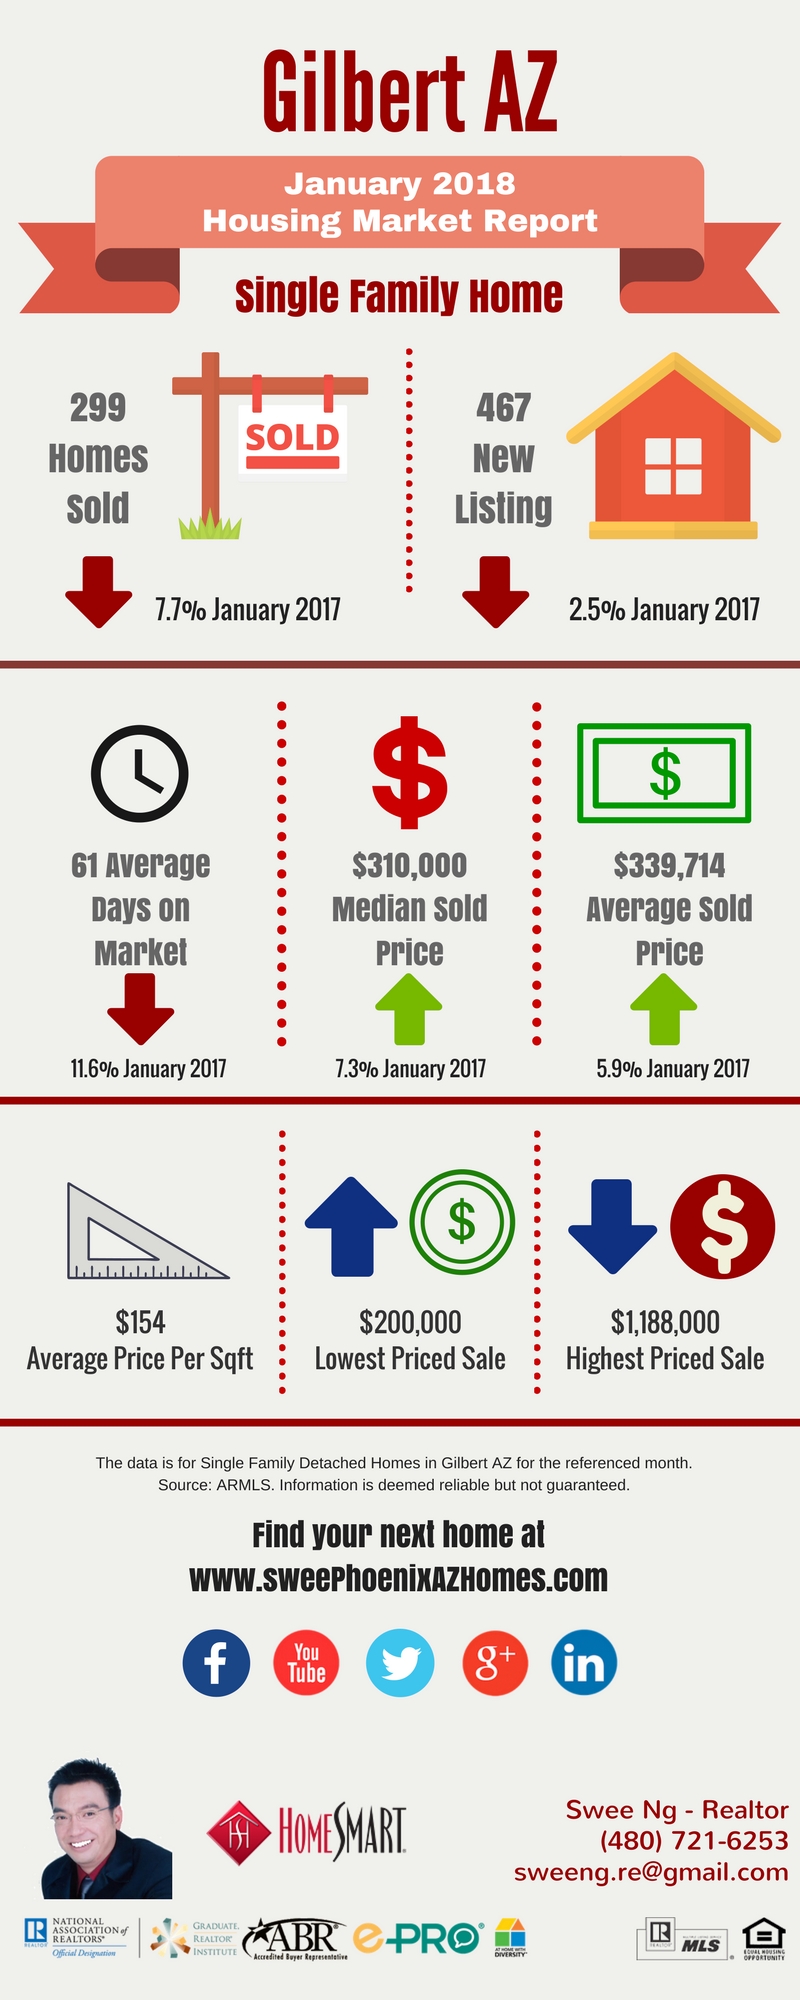 Gilbert AZ Housing Market Trends Report January 2018 by Swee Ng, Real Estate and House Value